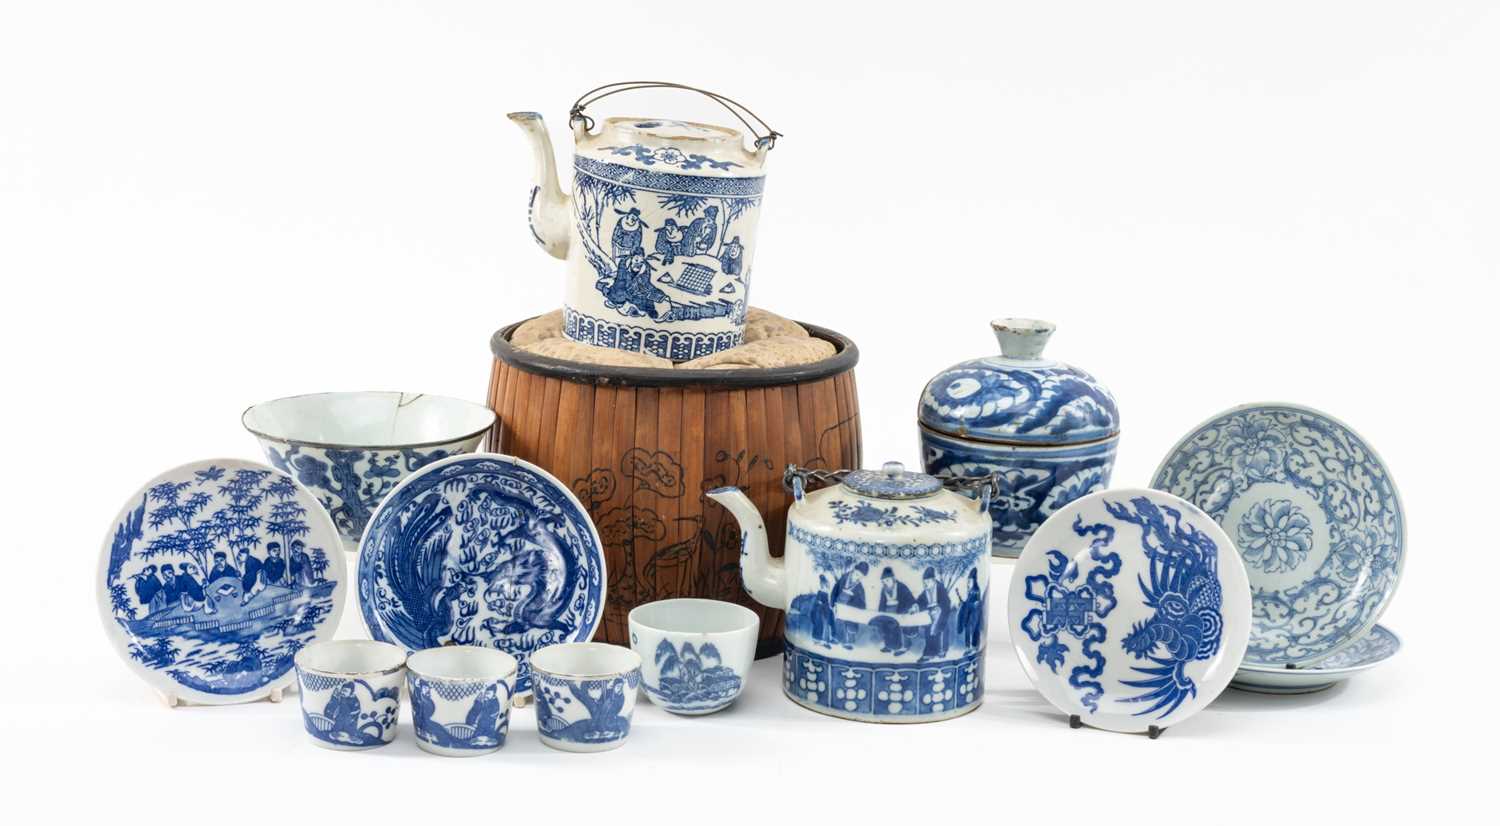 ASSORTED CHINESE BLUE & WHITE PORCELAIN, including two cylindrical teapots (one in bamboo